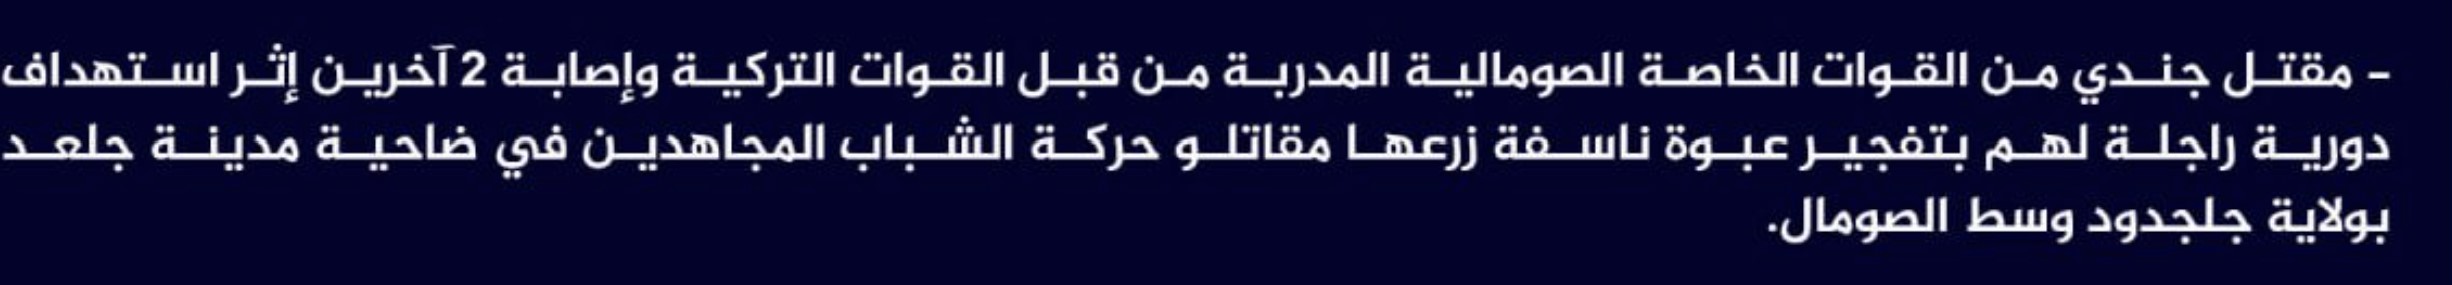 (Claim) al-Shabaab Killed a Somalian Special Forces Soldier and Injured Two Others in an IED Attack on a Foot Patrol in Galaad City, Galgaduud, Somalia - 22 June 2023